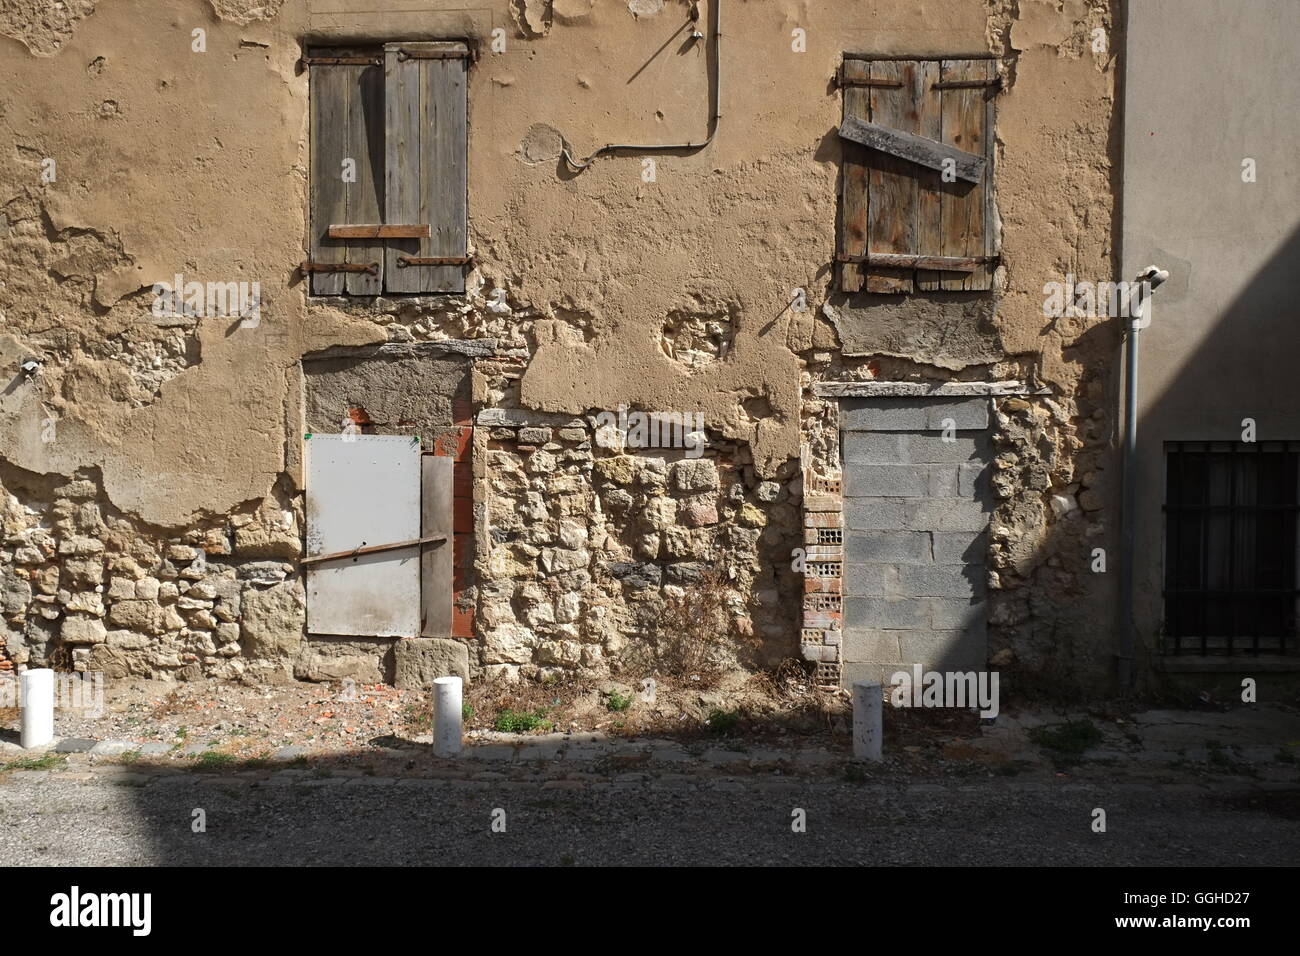 old character french architecture including four windows that have been roughly repaired in a practical rather than attractive s Stock Photo